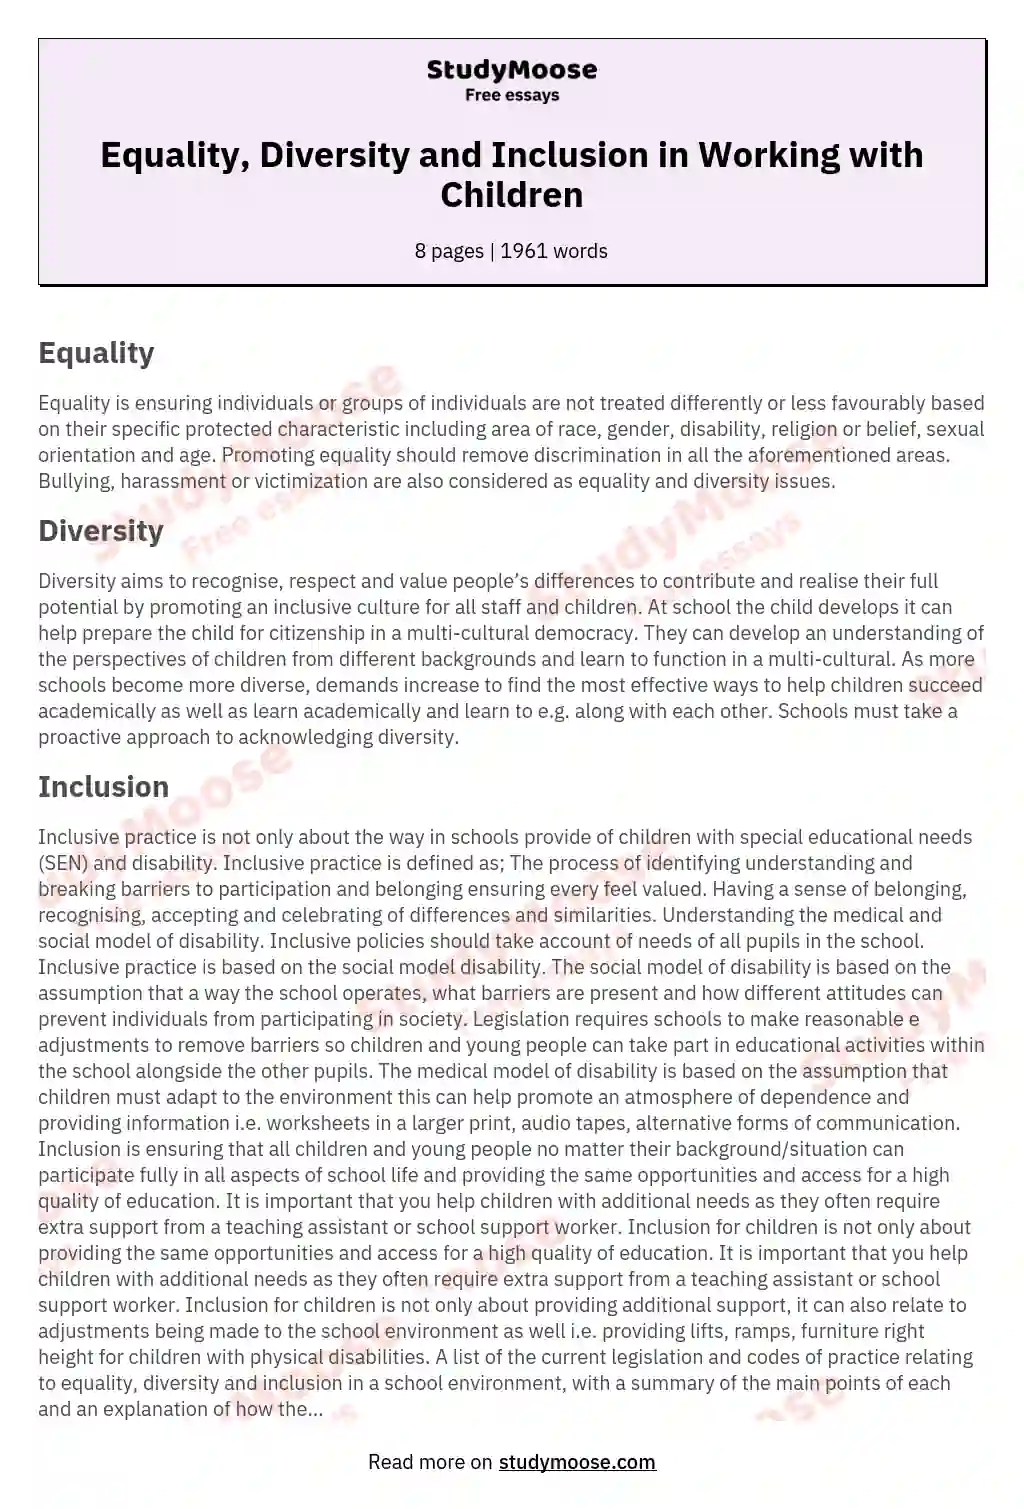 essay on diversity equity and inclusion